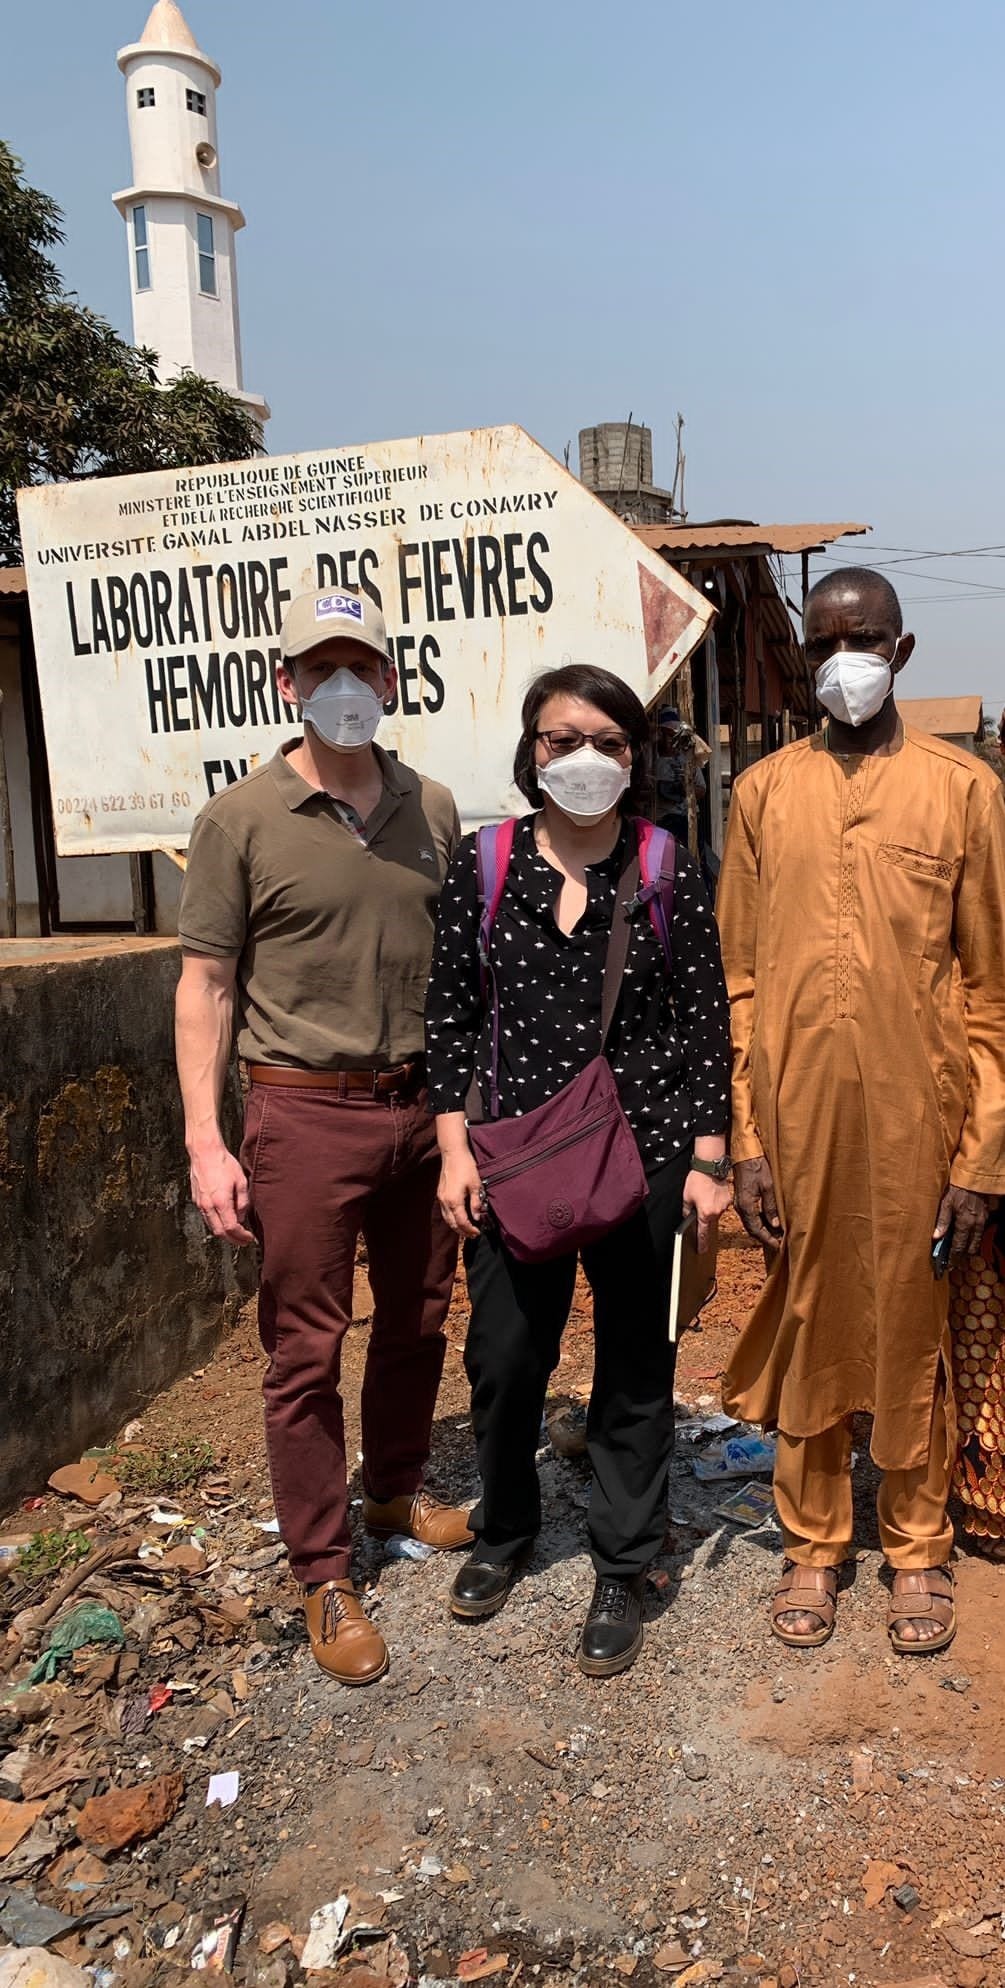 EIS Officer Jason Malenfant (left) and supervisor Mary Choi (center) meet with the Director of the Viral Hemorrhagic Fever Laboratory, N’Faly Magassouba (right), in Conakry, Guinea in February of 2022 to plan post-outbreak surveillance activities following West Africa’s first outbreak of Marburg virus disease.